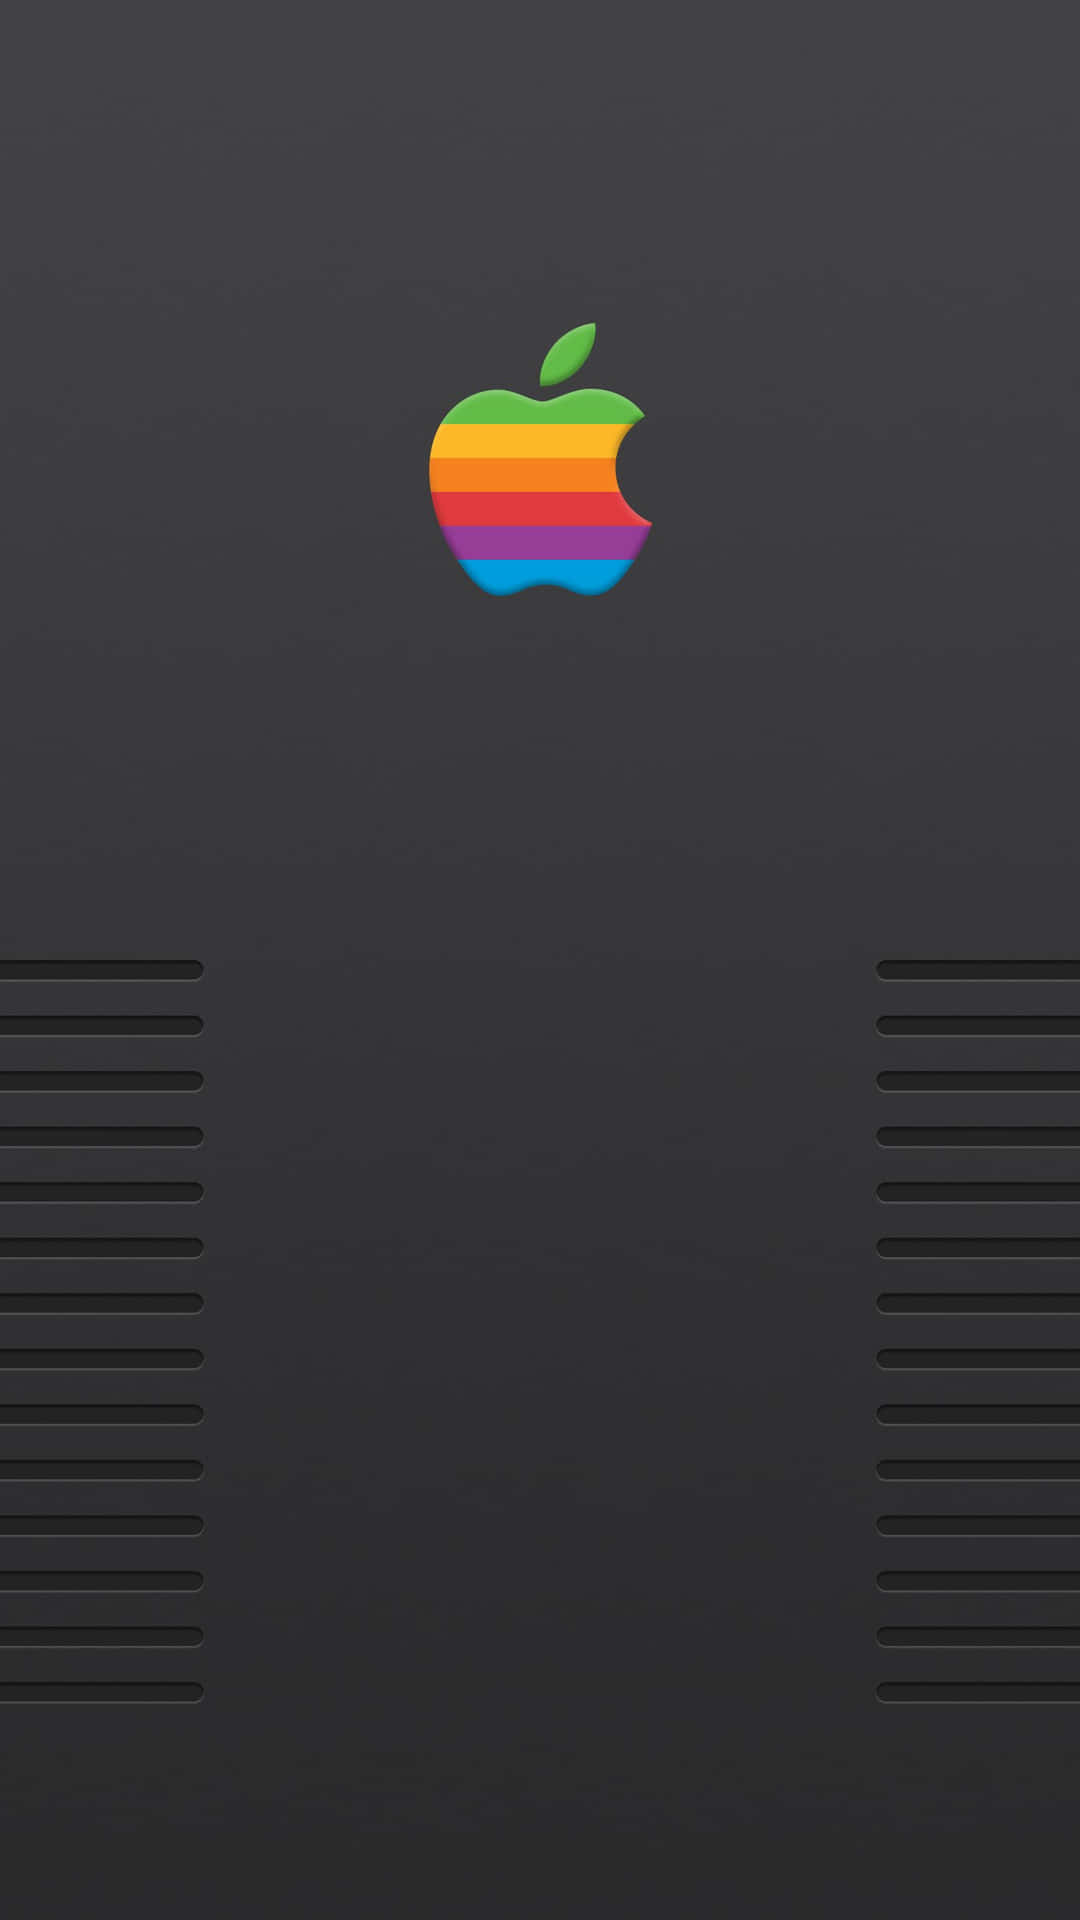 feel nostalgic with this retro iPhone look. Wallpaper